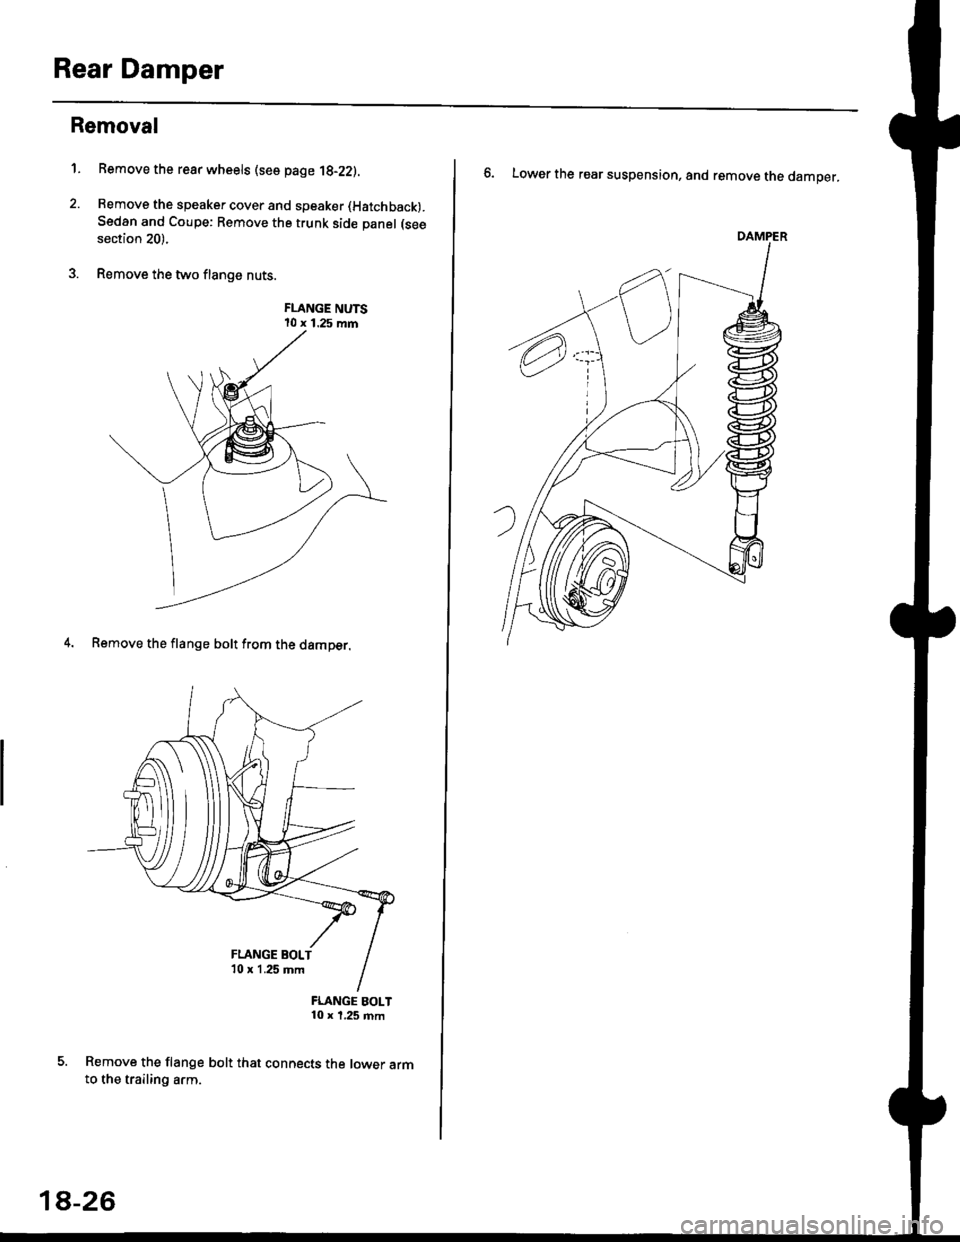 HONDA CIVIC 1997 6.G Workshop Manual Rear Damper
Removal
1. Bemove the rear wheels (see page 1g-22).
2. Remove the speaker cover and speaker (Hatchback).
Sedan and Coupe: Remove the trunk side panel (see
section 20).
3. Remove the two fl